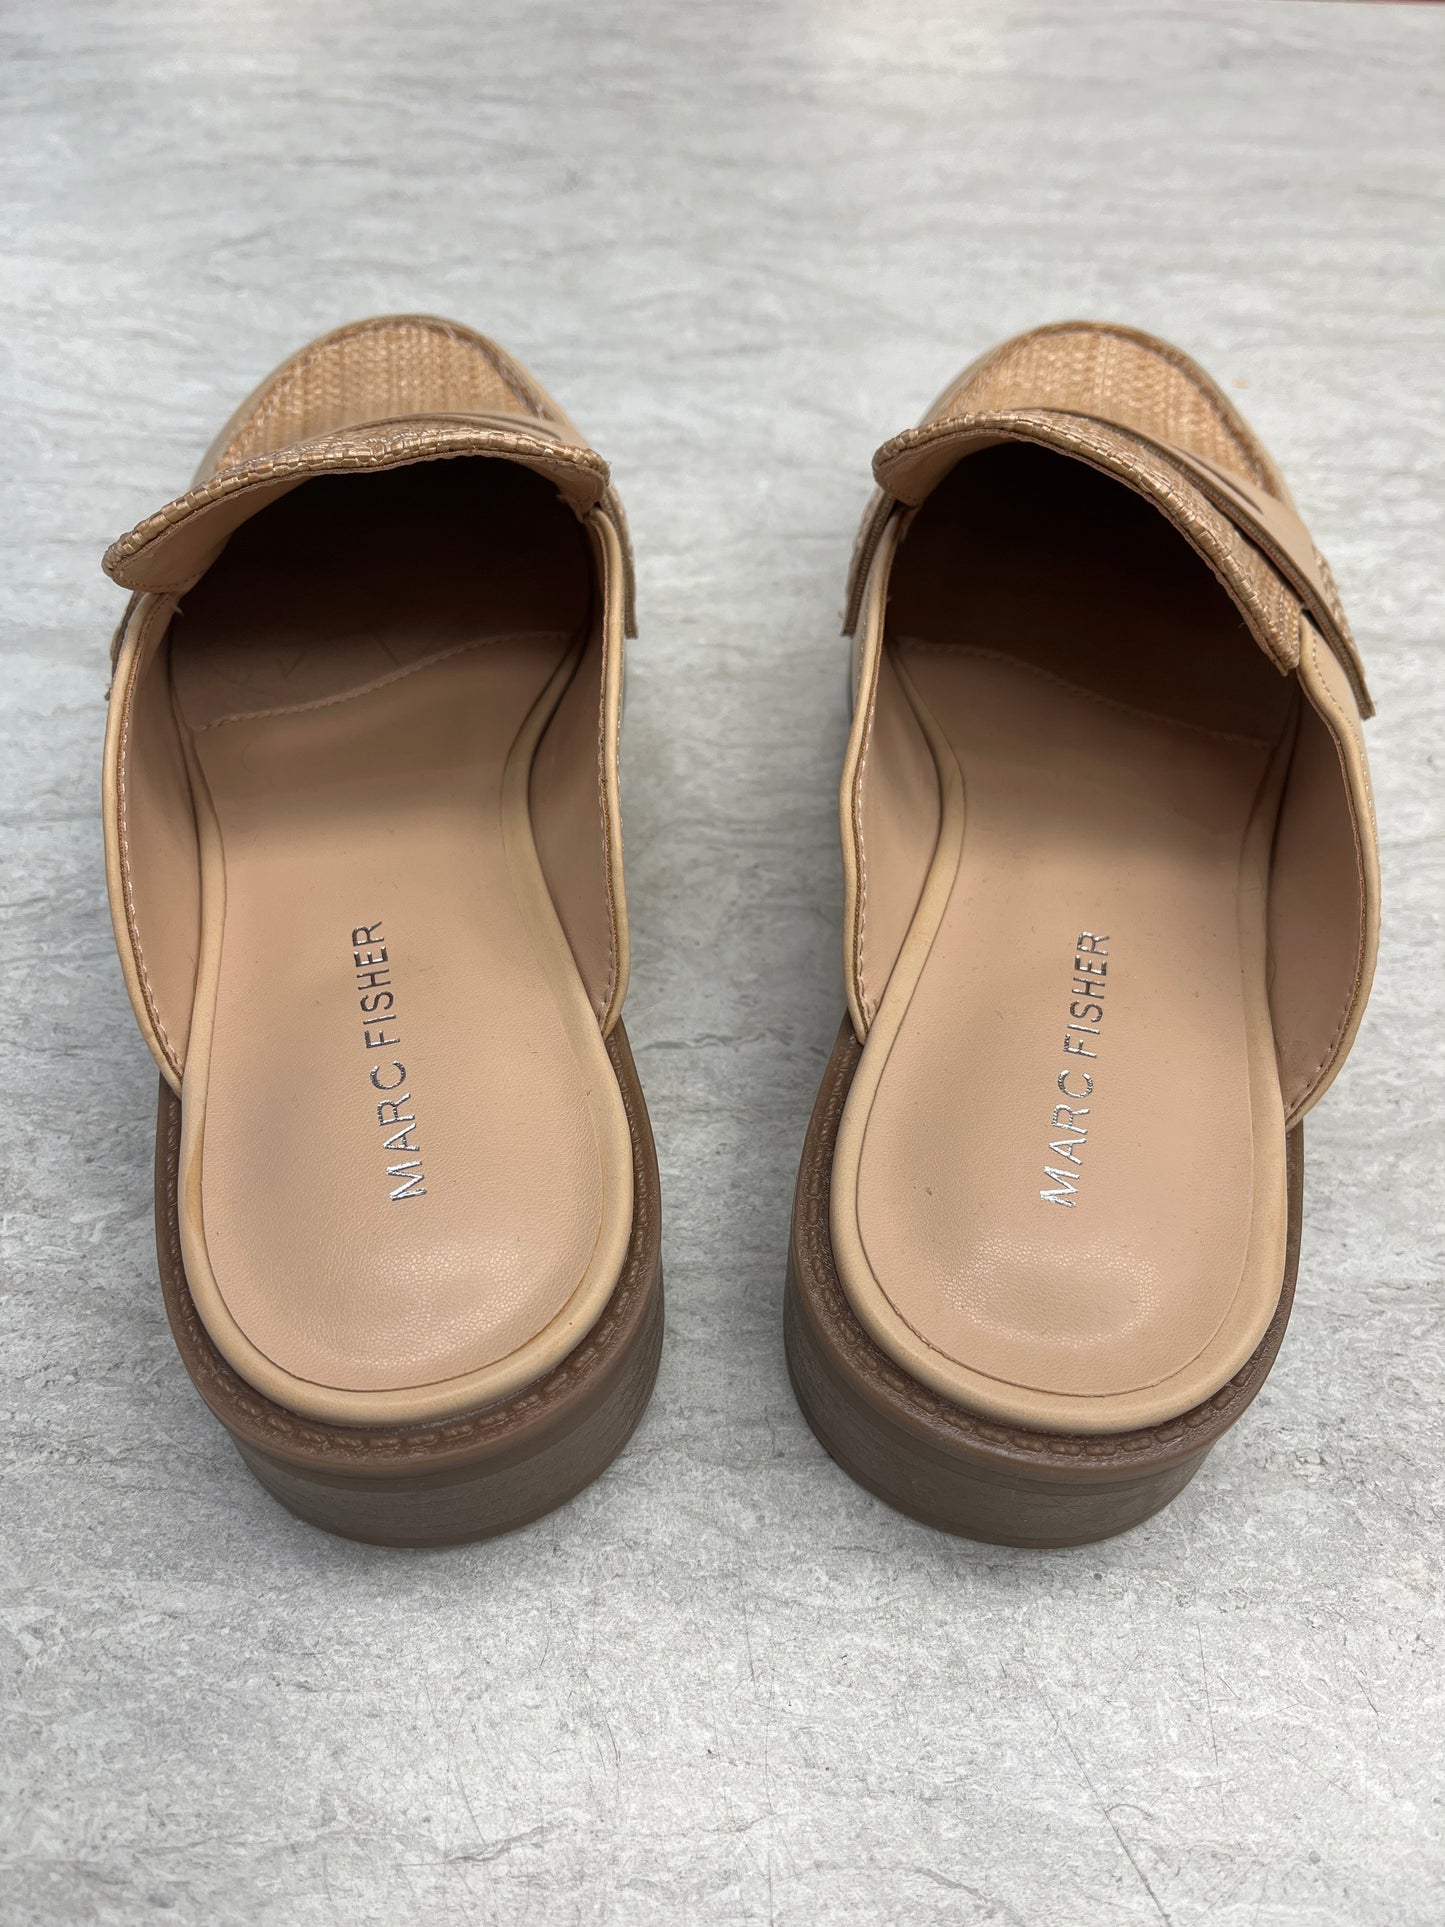 Tan Shoes Flats Marc Fisher, Size 7.5